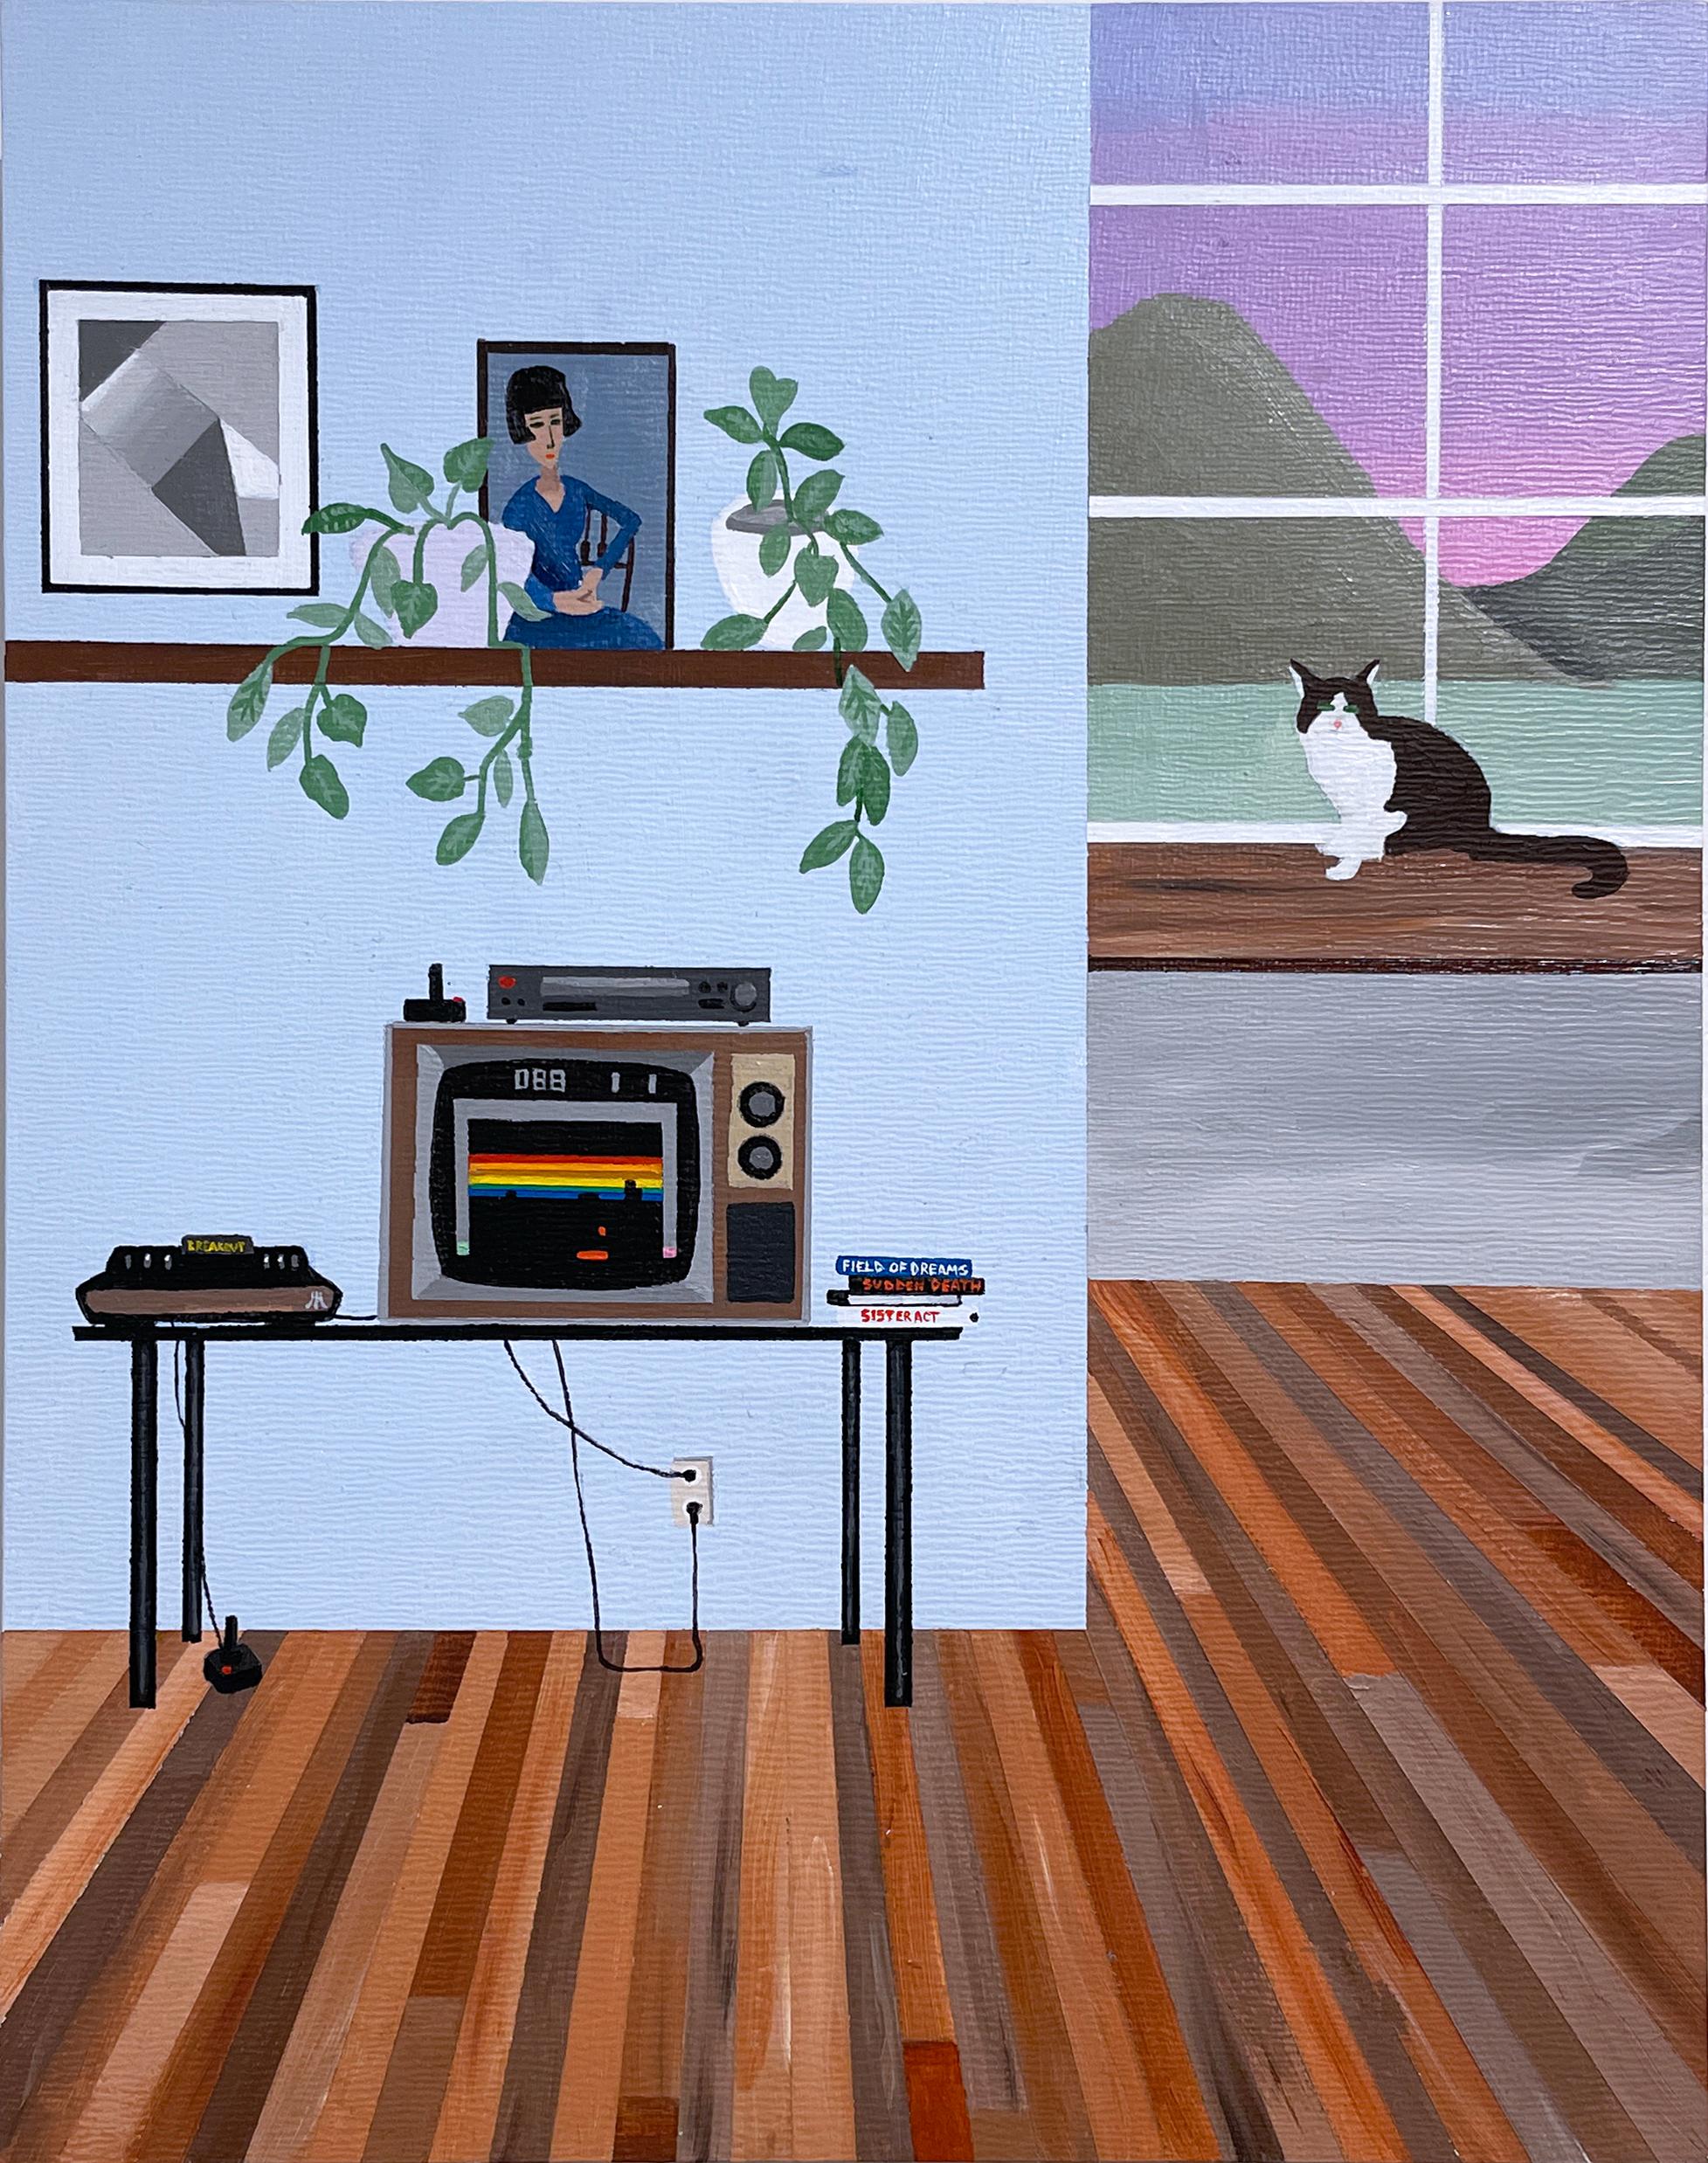 "Field of Dreams" (2023) by Keith Garcia
Acrylic on wood panel
14 x 11 x 1.5" vertically oriented rectangle

Figurative painting depicting an interior space. A 1980s vintage television set sits on a table connected to an Atari gaming system with the